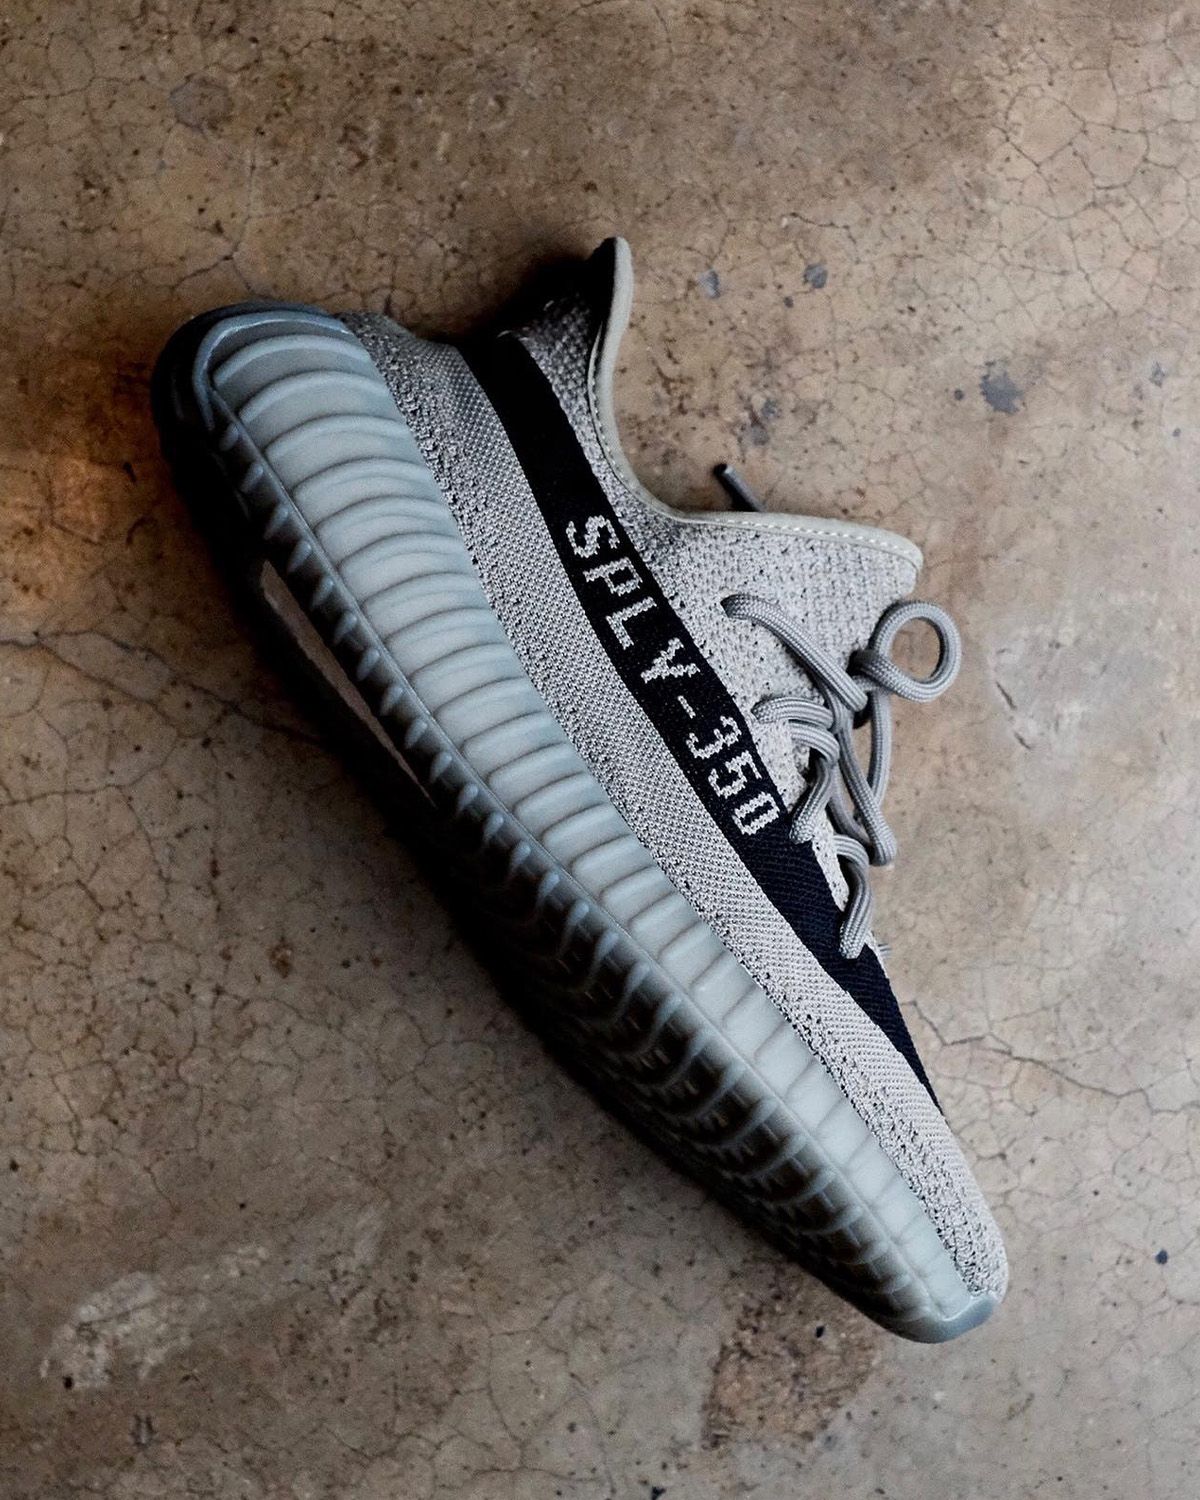 wheel Contempt approve New Looks // YEEZY 350 V2 "Granite" | HOUSE OF HEAT